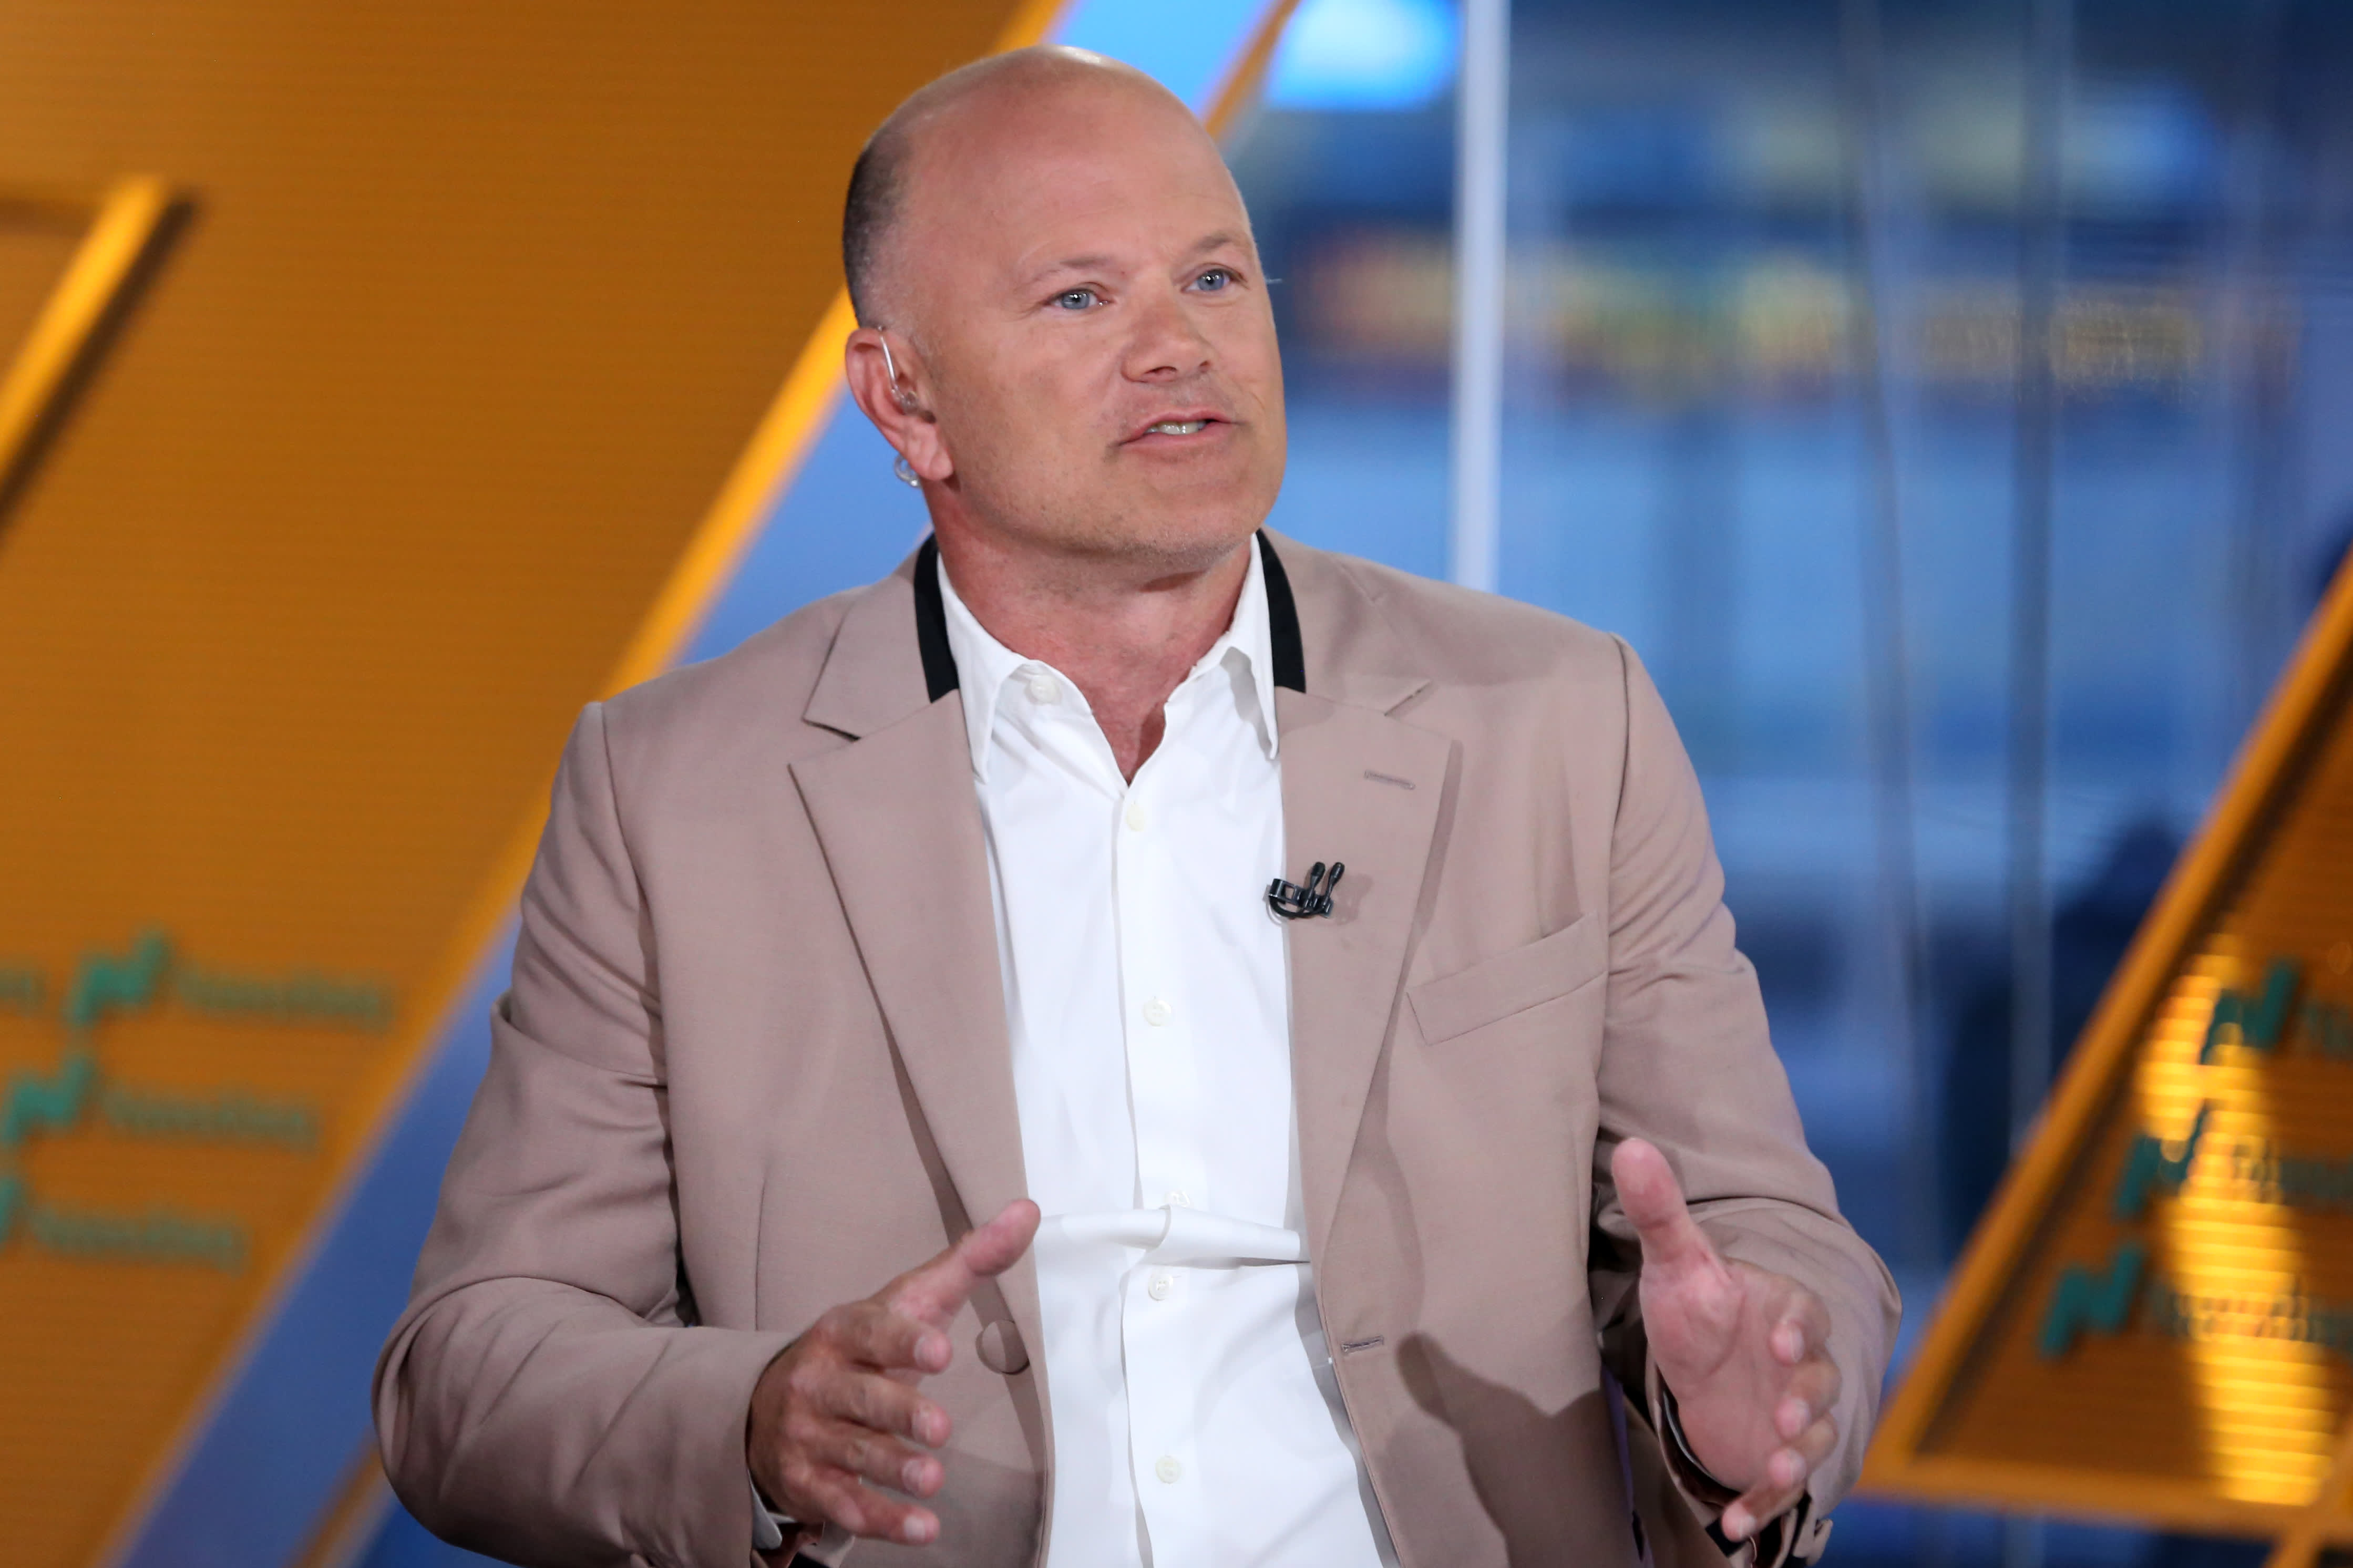 Bitcoin is due to a downturn, but institutions will buy the dip, says Novogratz